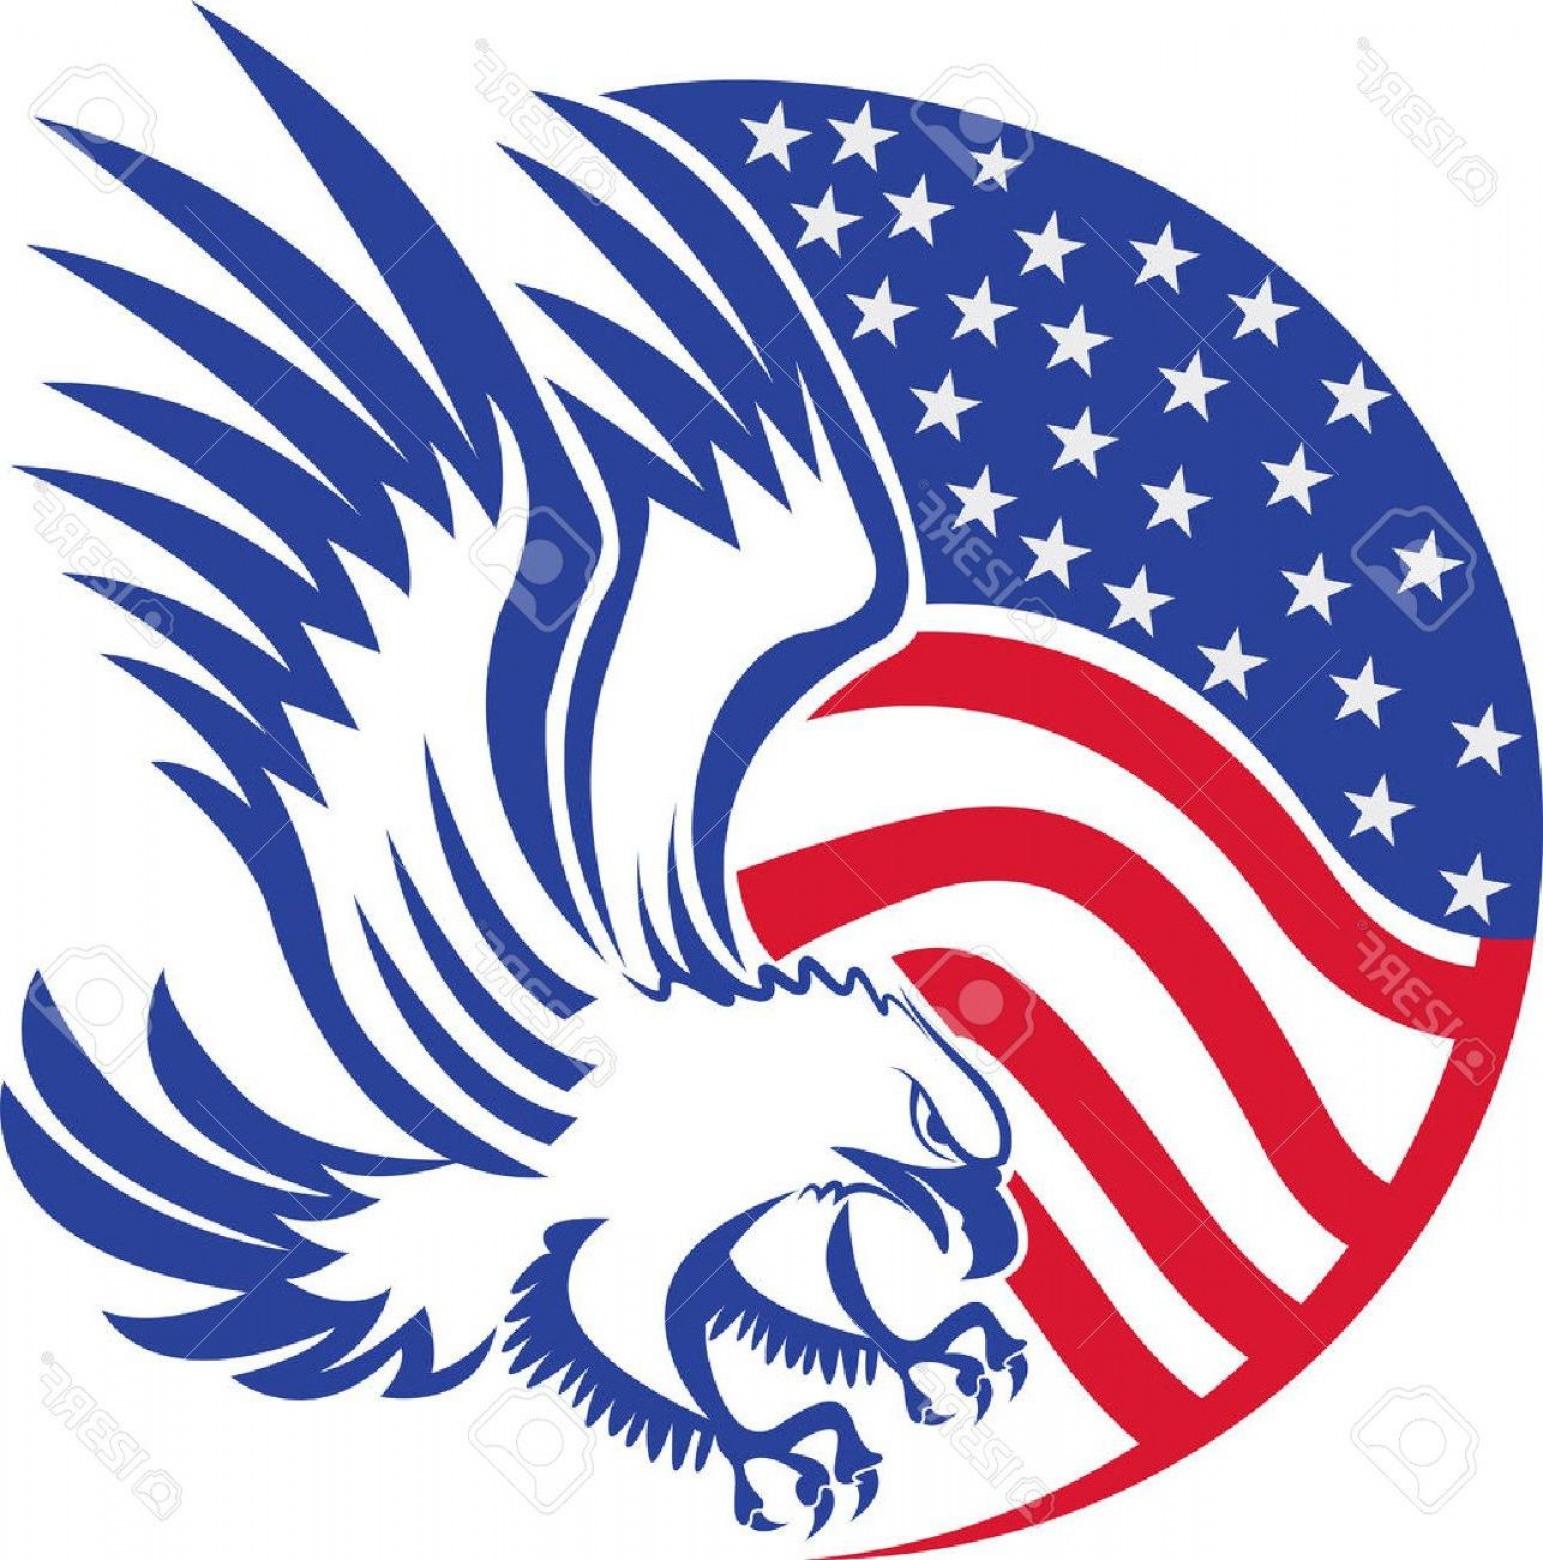 HD Bald Eagle With American Flag Sketches Vector Pictures